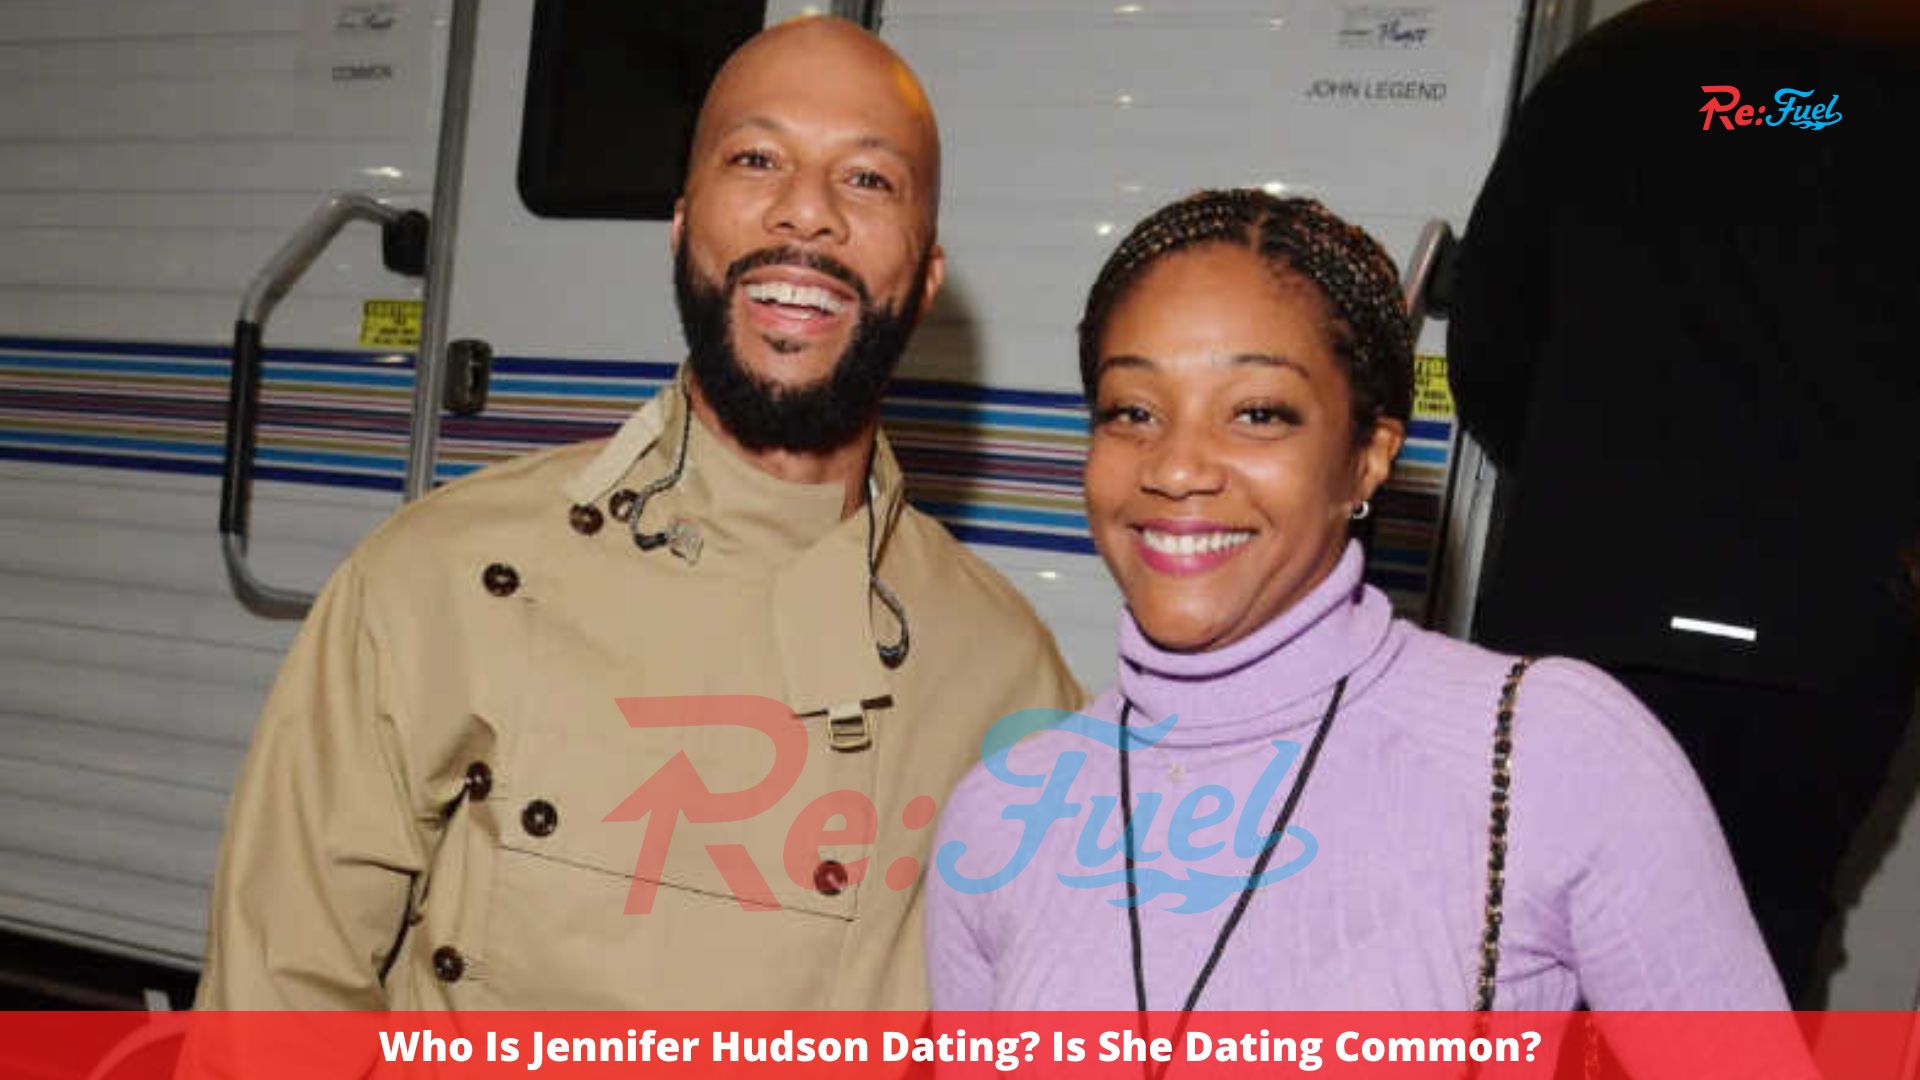 Who Is Jennifer Hudson Dating? Is She Dating Common?